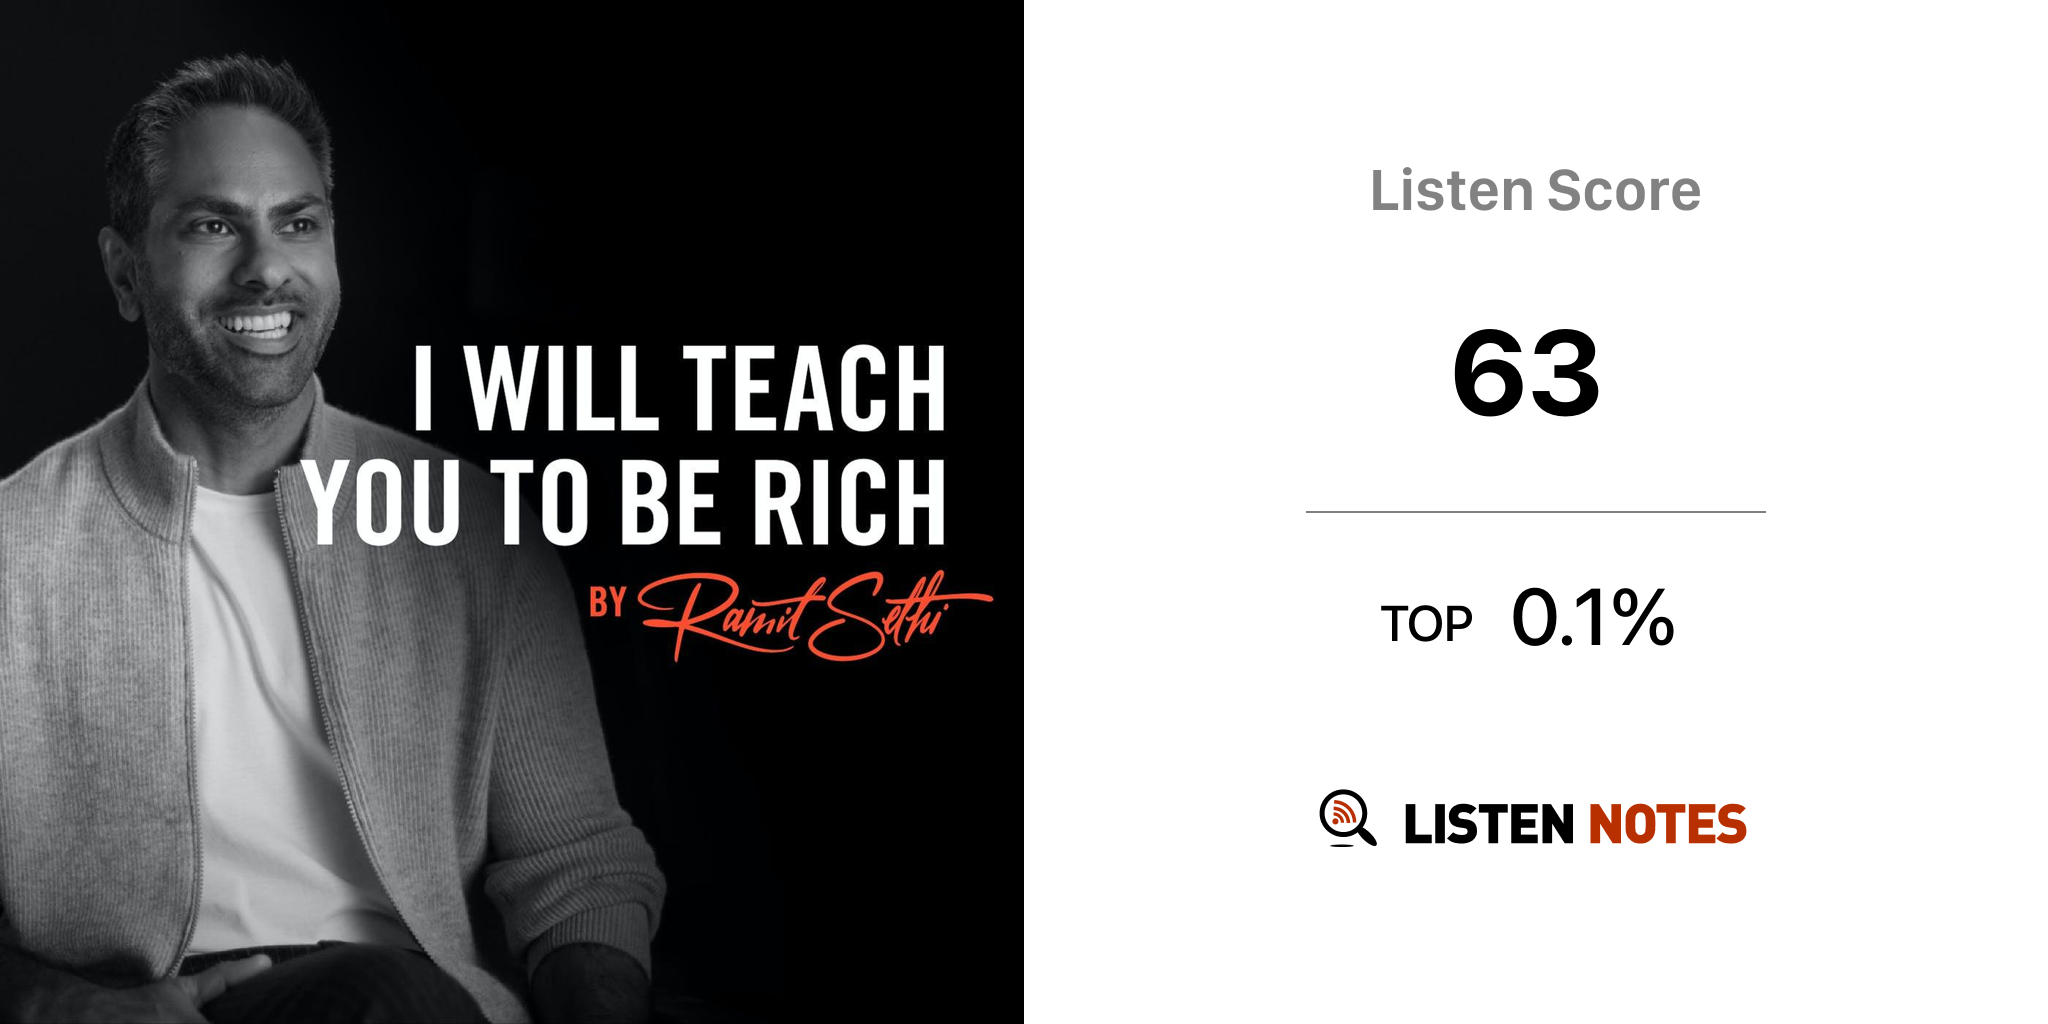 Listen to Get Rich Education podcast